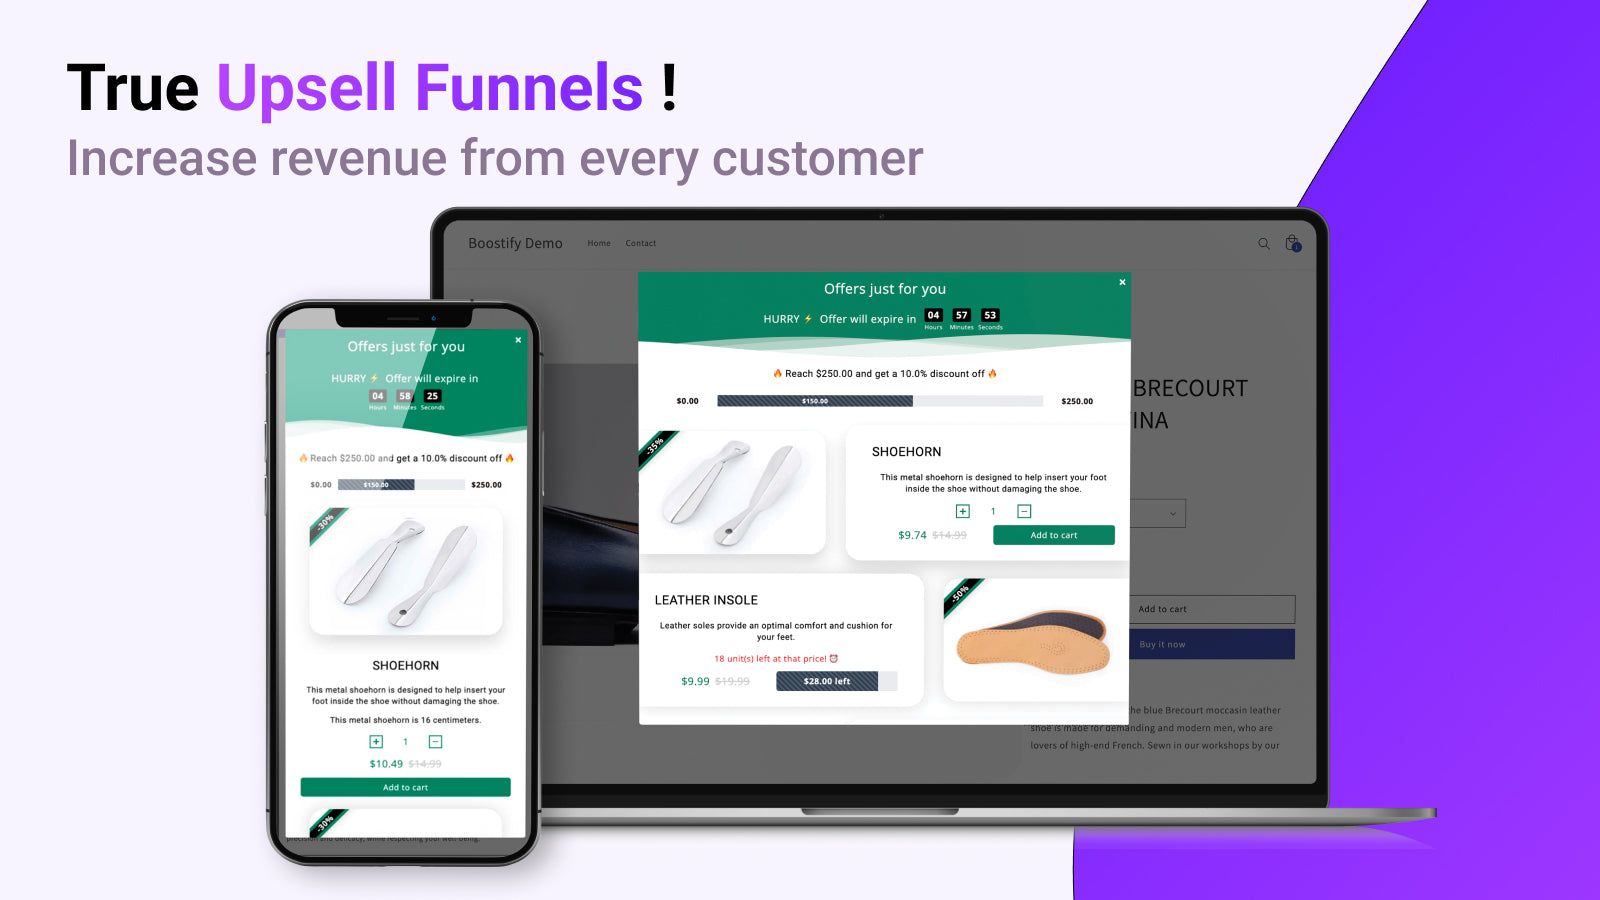 True Upsell Funnel! Increase revenue from any customer